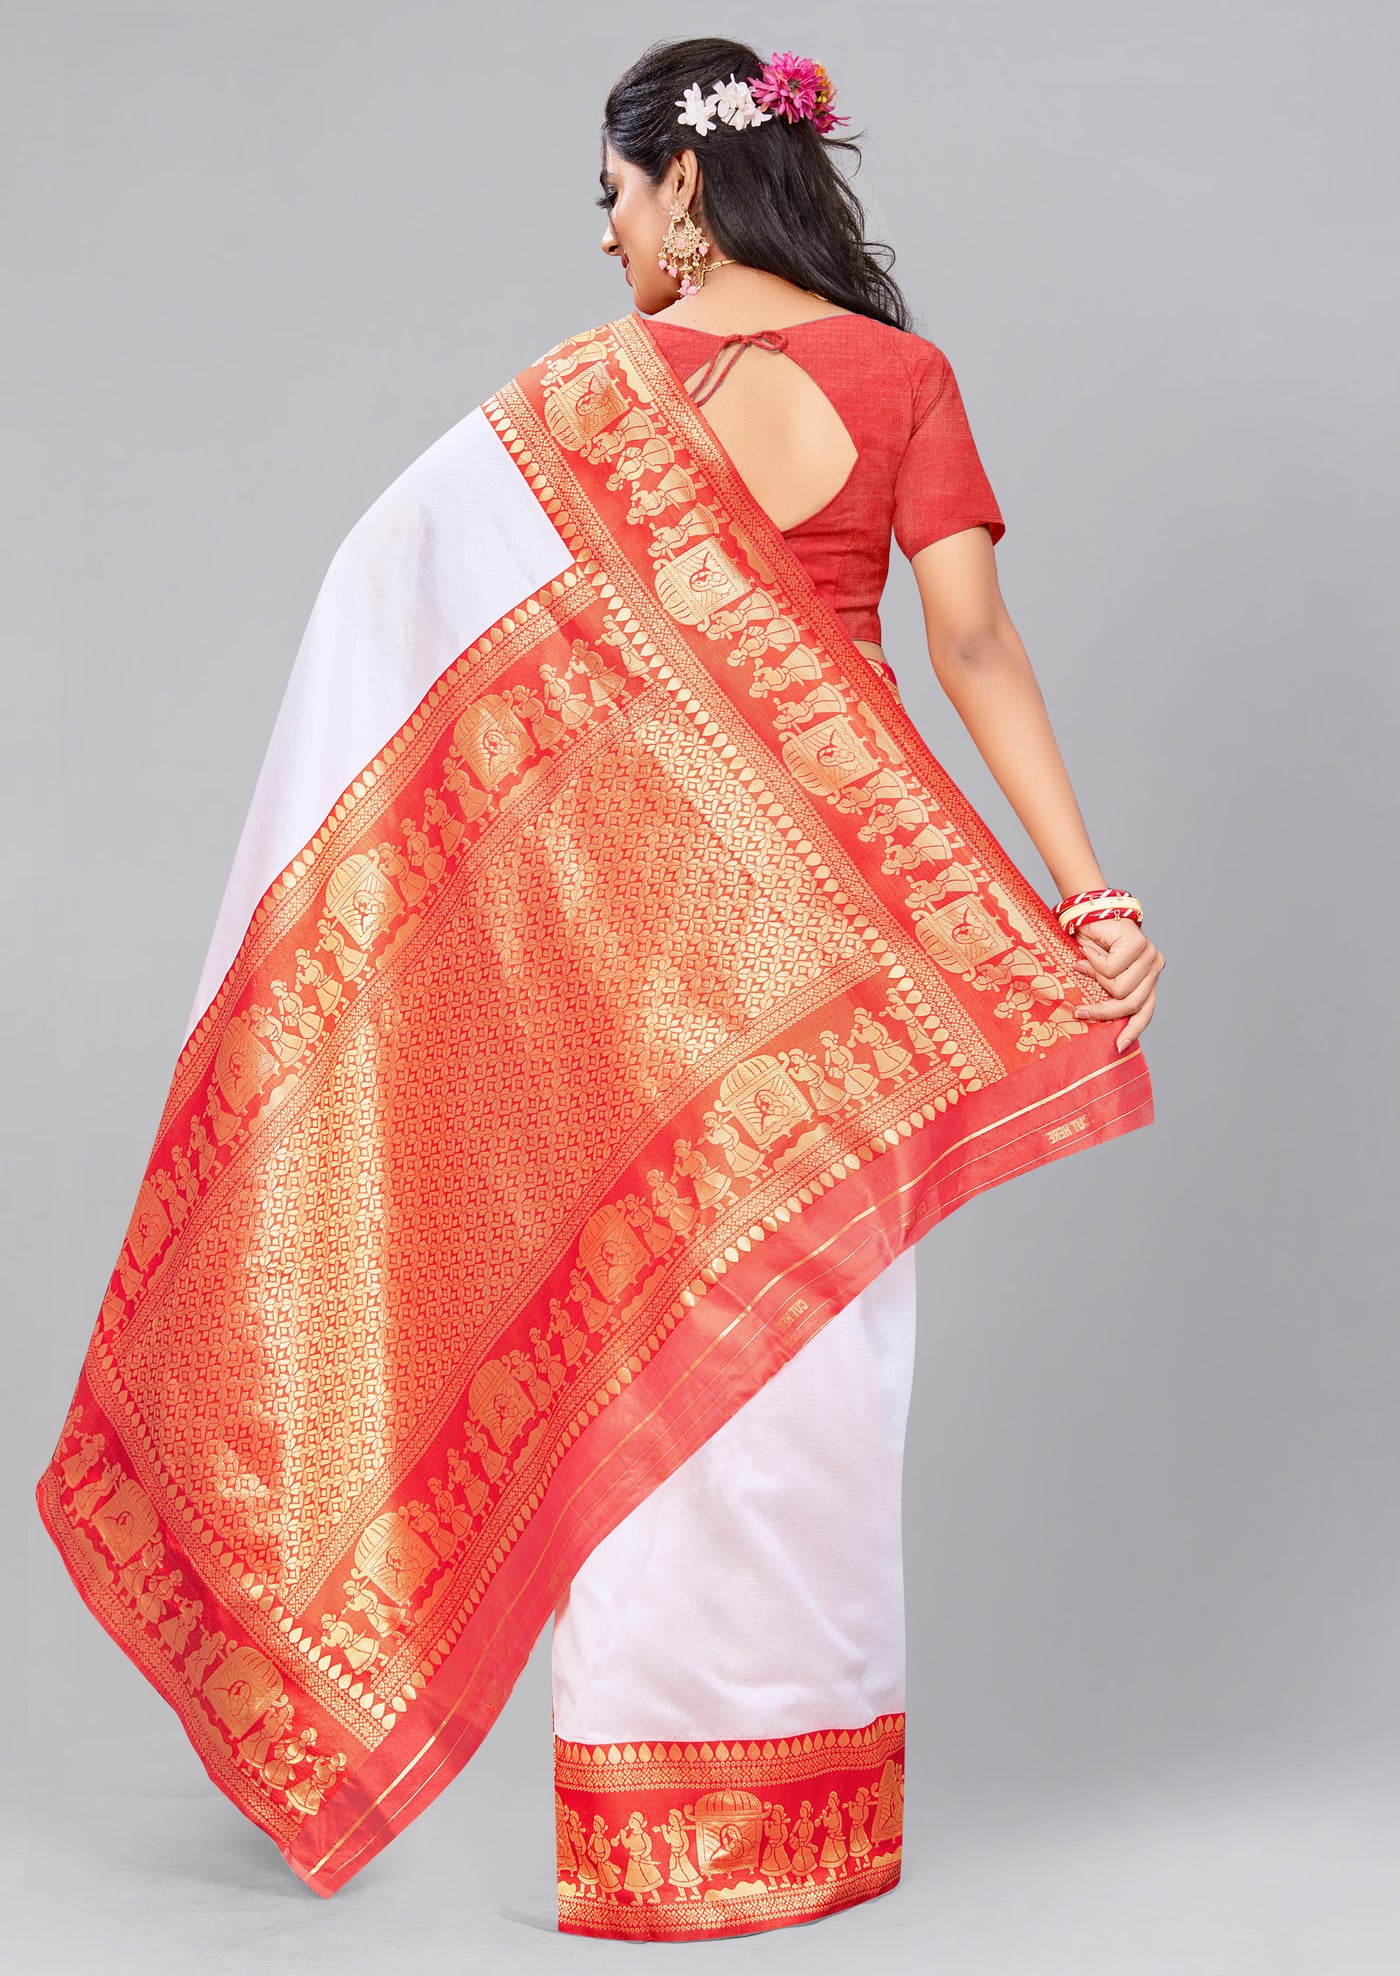 Orange Traditional Embroidered Saree - Indian Clothing in Denver, CO, Aurora, CO, Boulder, CO, Fort Collins, CO, Colorado Springs, CO, Parker, CO, Highlands Ranch, CO, Cherry Creek, CO, Centennial, CO, and Longmont, CO. Nationwide shipping USA - India Fashion X